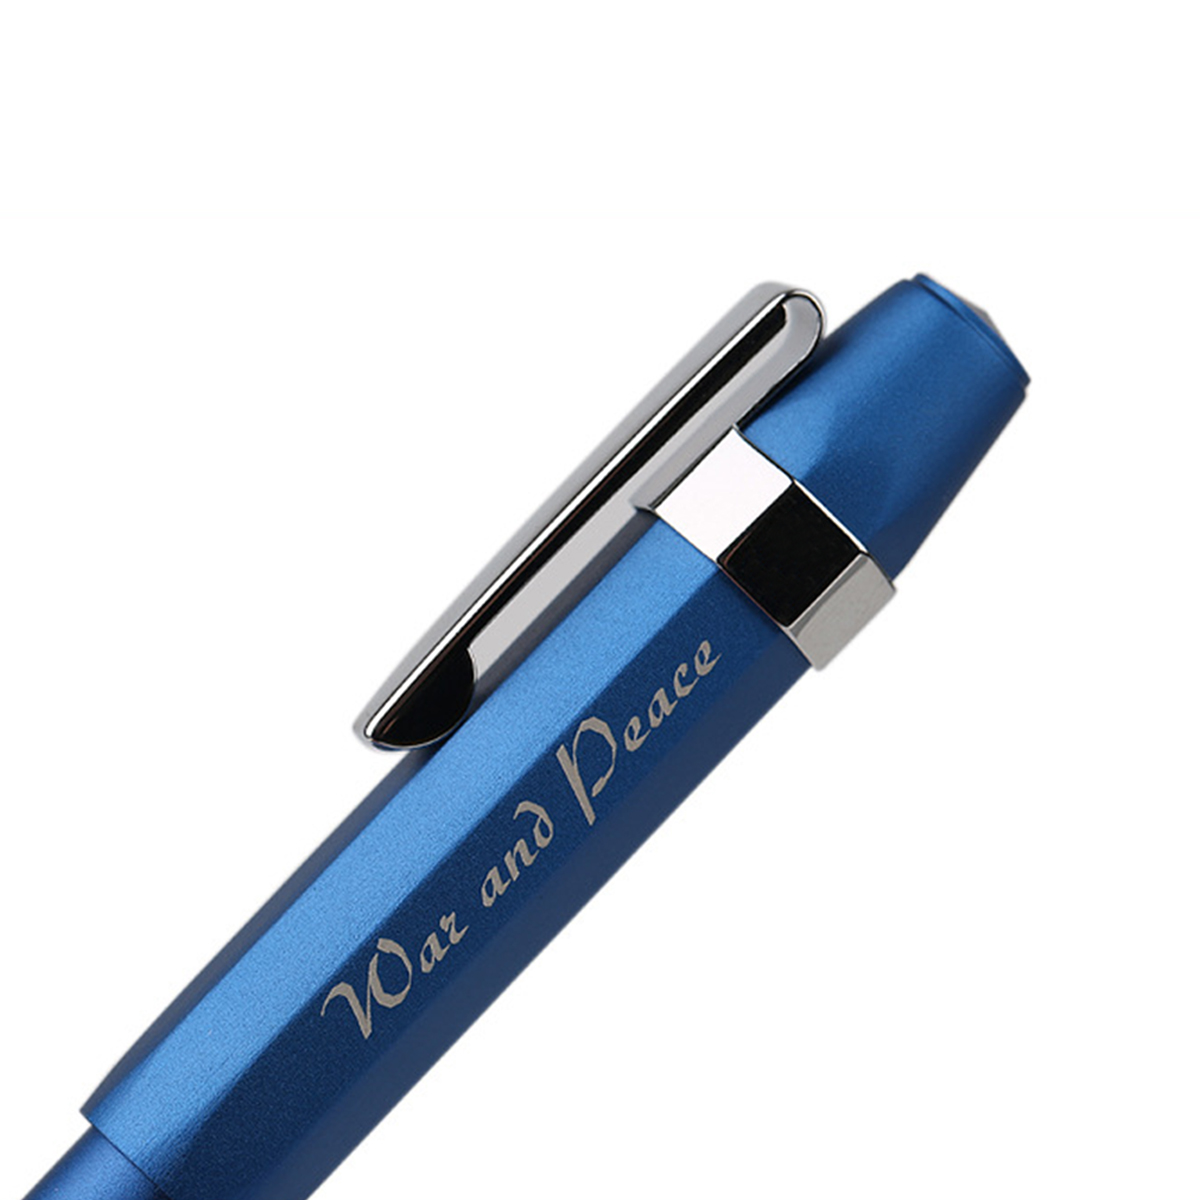 Metal-Fountain-Pen-Short-Smooth-Calligraphy-Writing-Pen-Ink-Gel-Pen-with-Iron-Case-Gift-for-Students-1755553-5